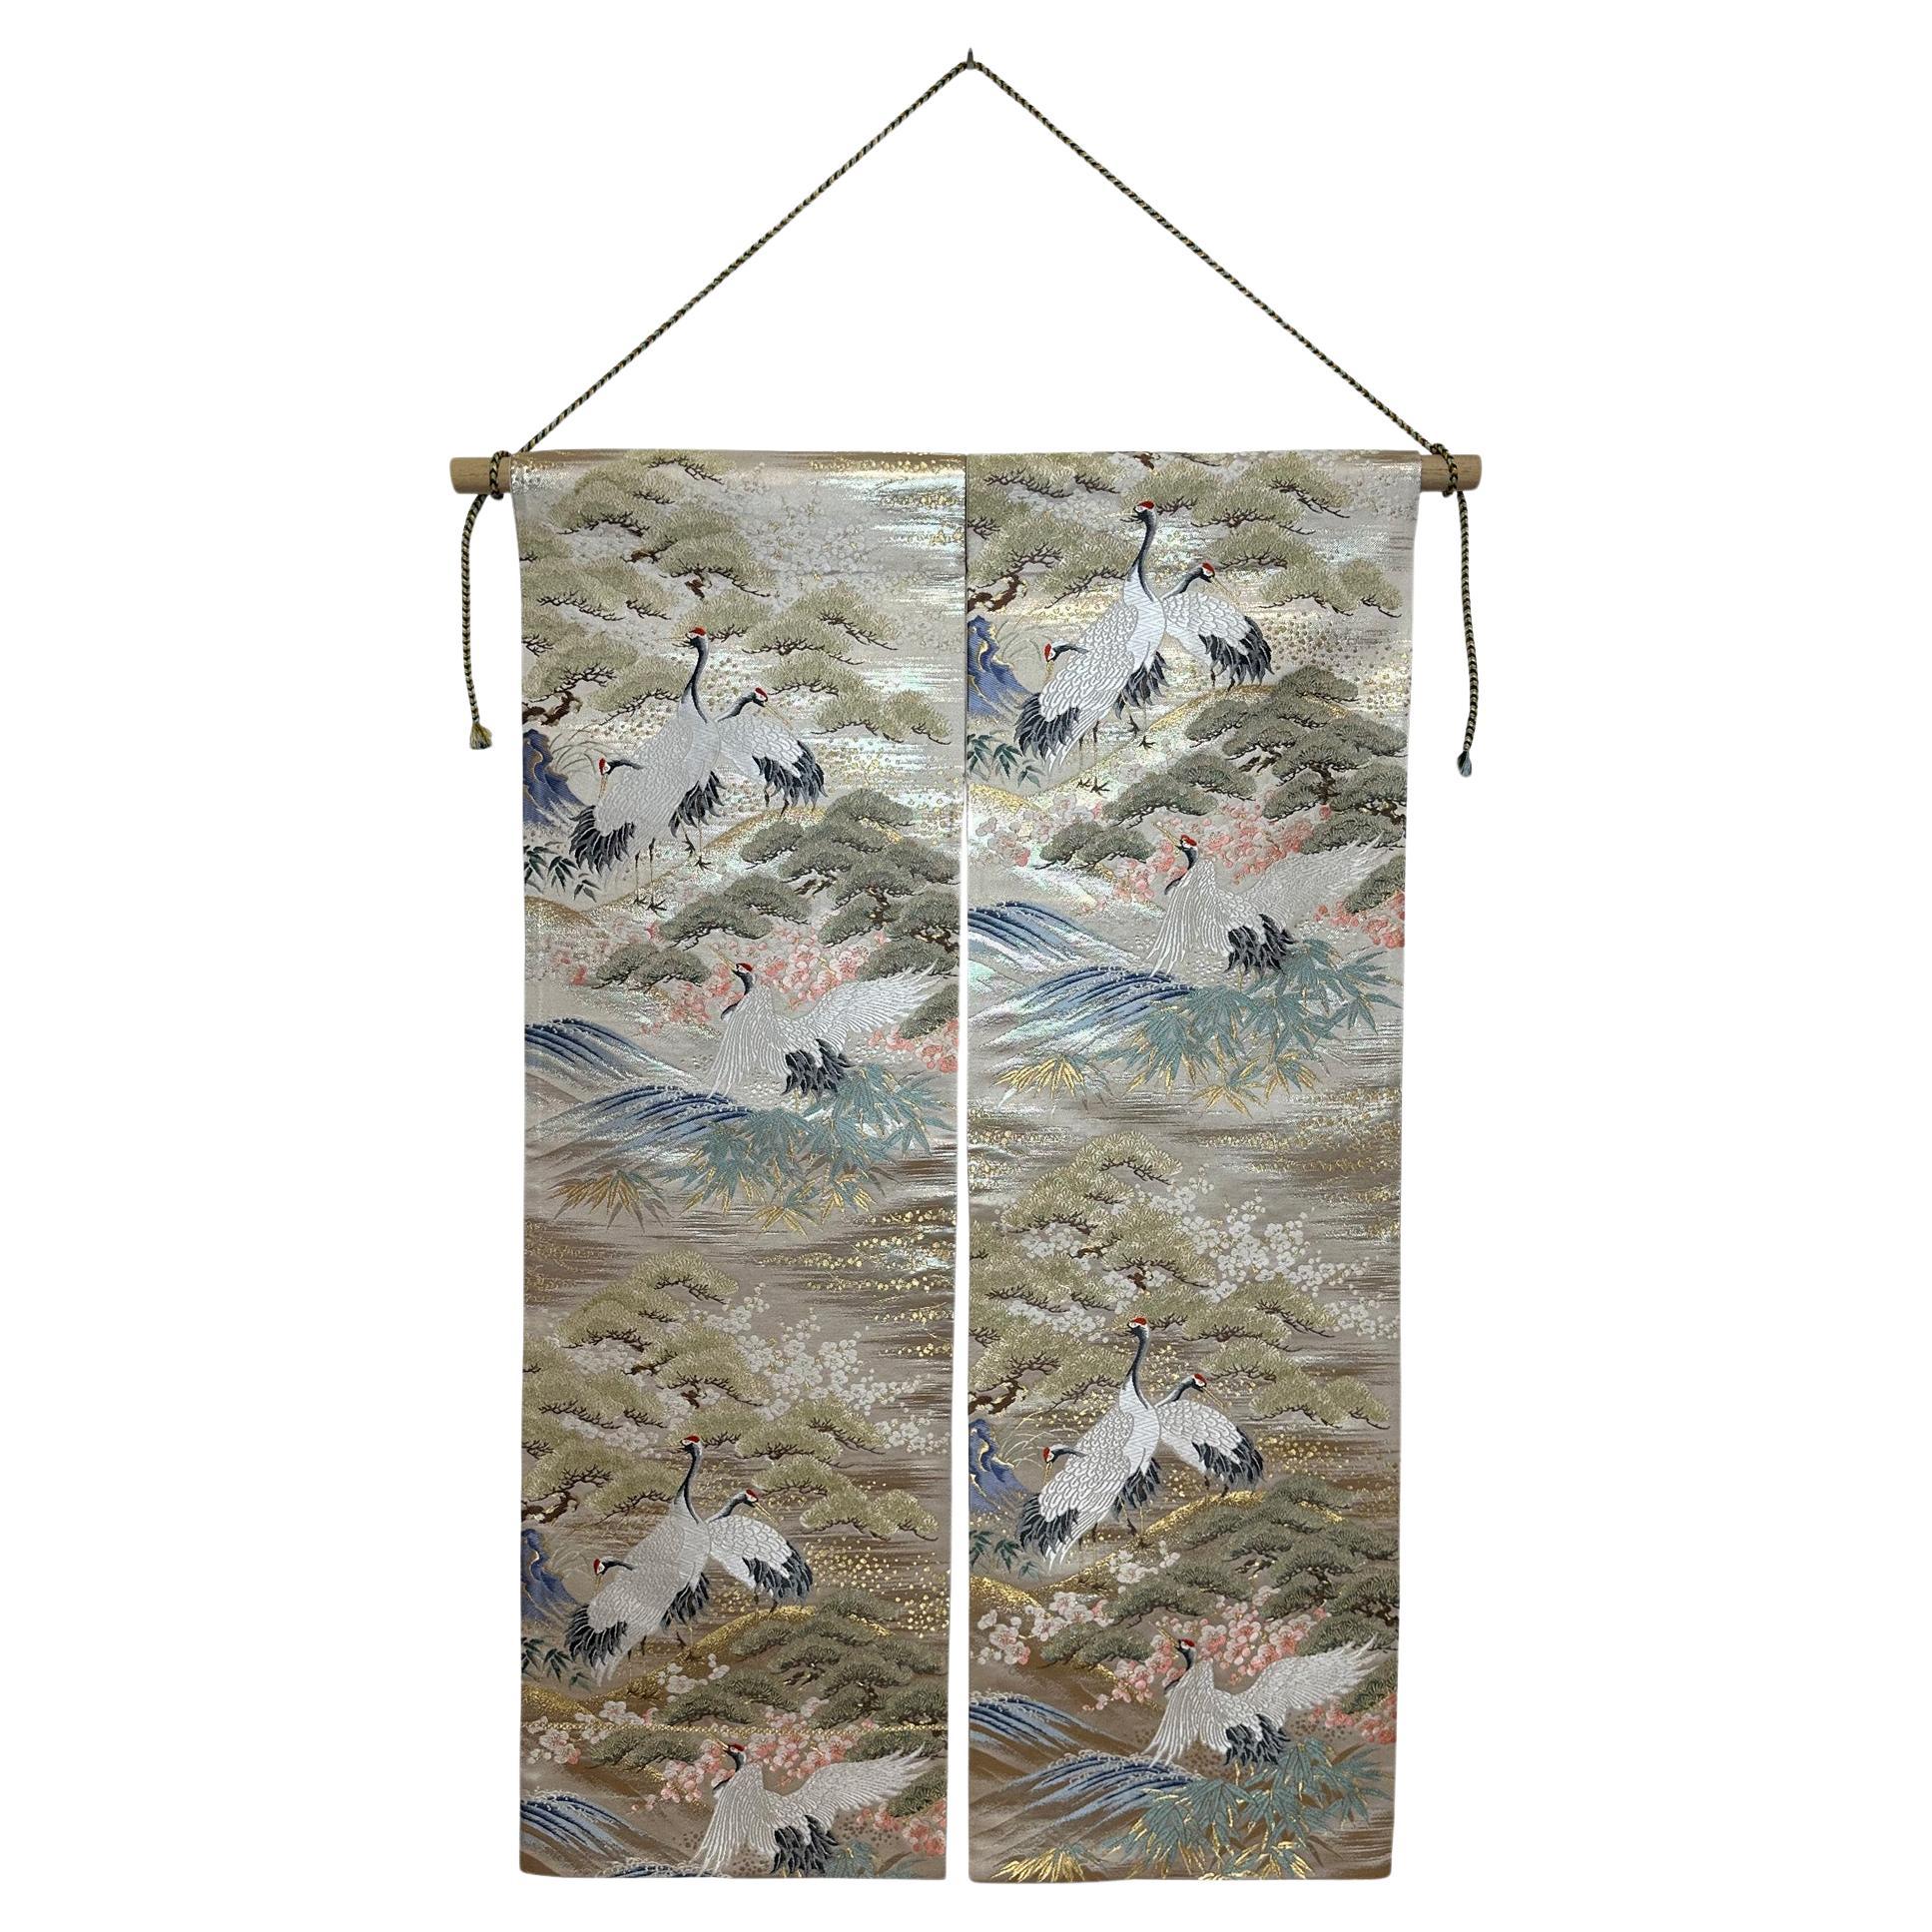 Kimono Tapestry "The Crane's Departure", Japanese Art, Japanese Hanging Scroll For Sale